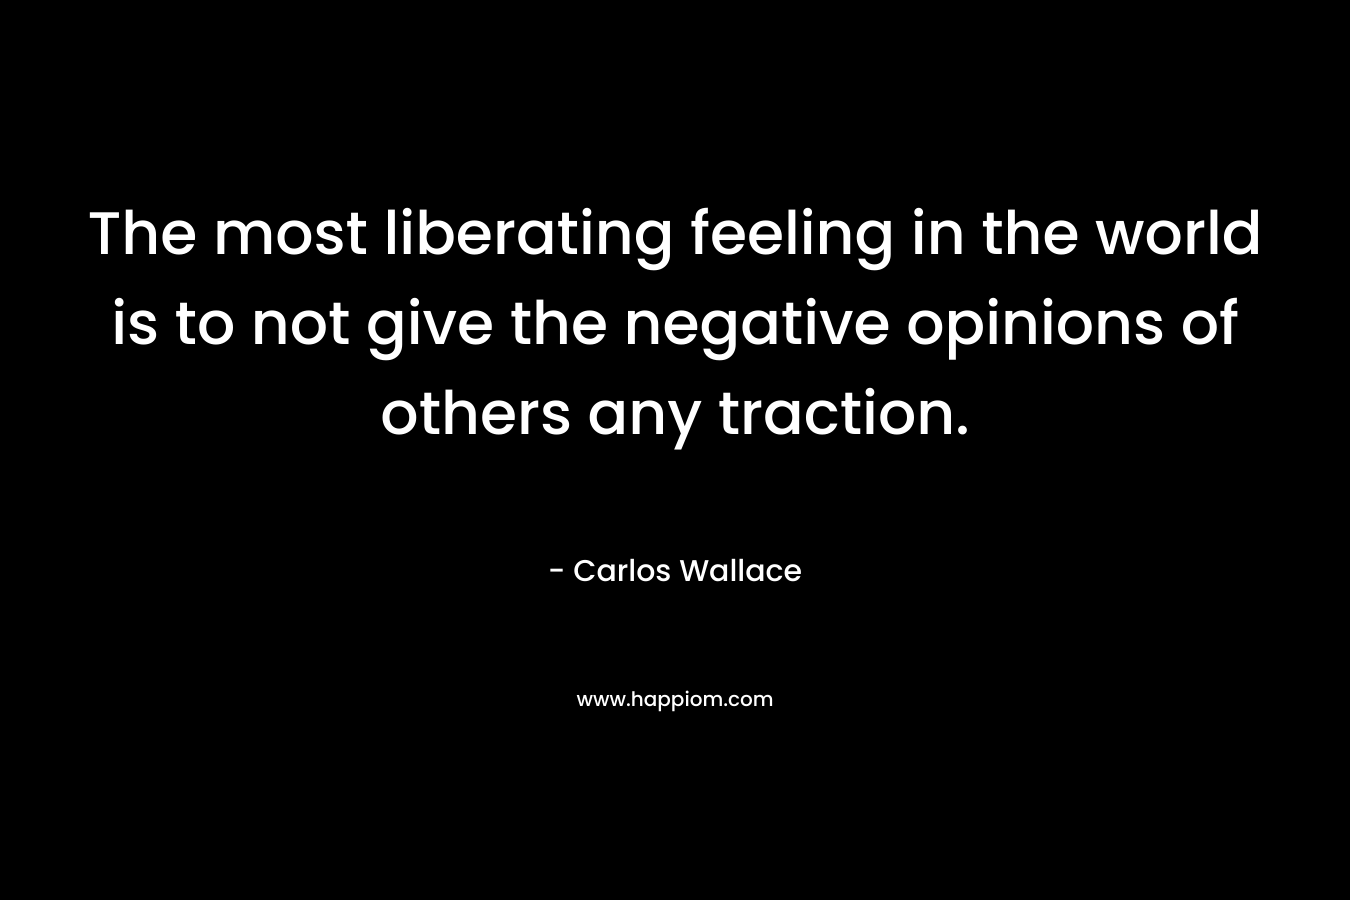 The most liberating feeling in the world is to not give the negative opinions of others any traction.